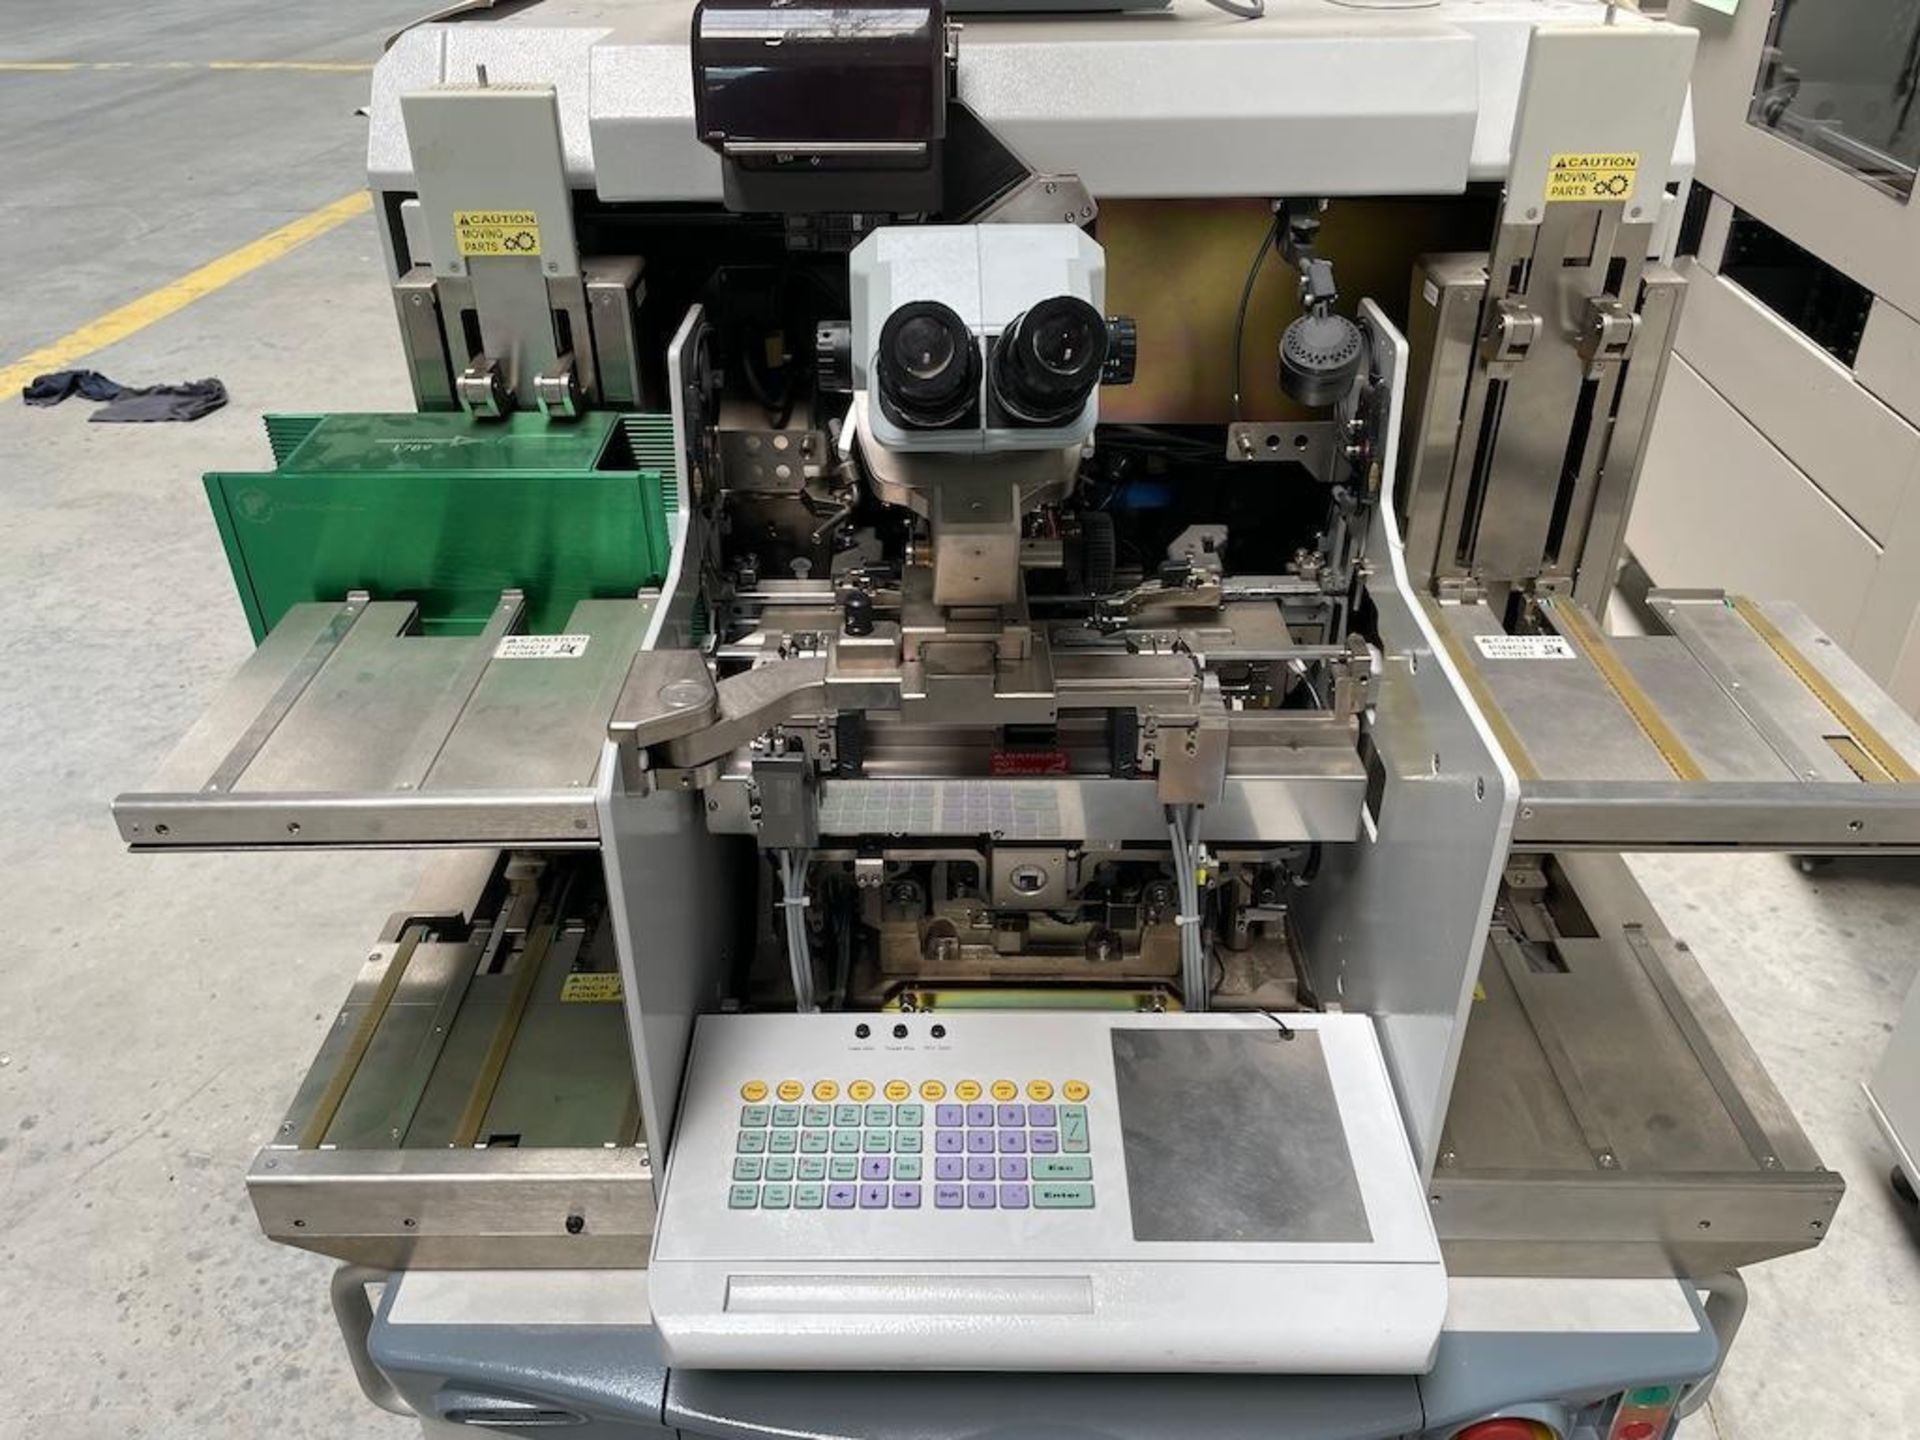 2009 ASM TECHNOLOGY MODEL EAGLE EXTREME, WIRE BONDER, MICROSCOPE INSPECTION, SN XT08-025 [MATANE] *P - Image 3 of 4